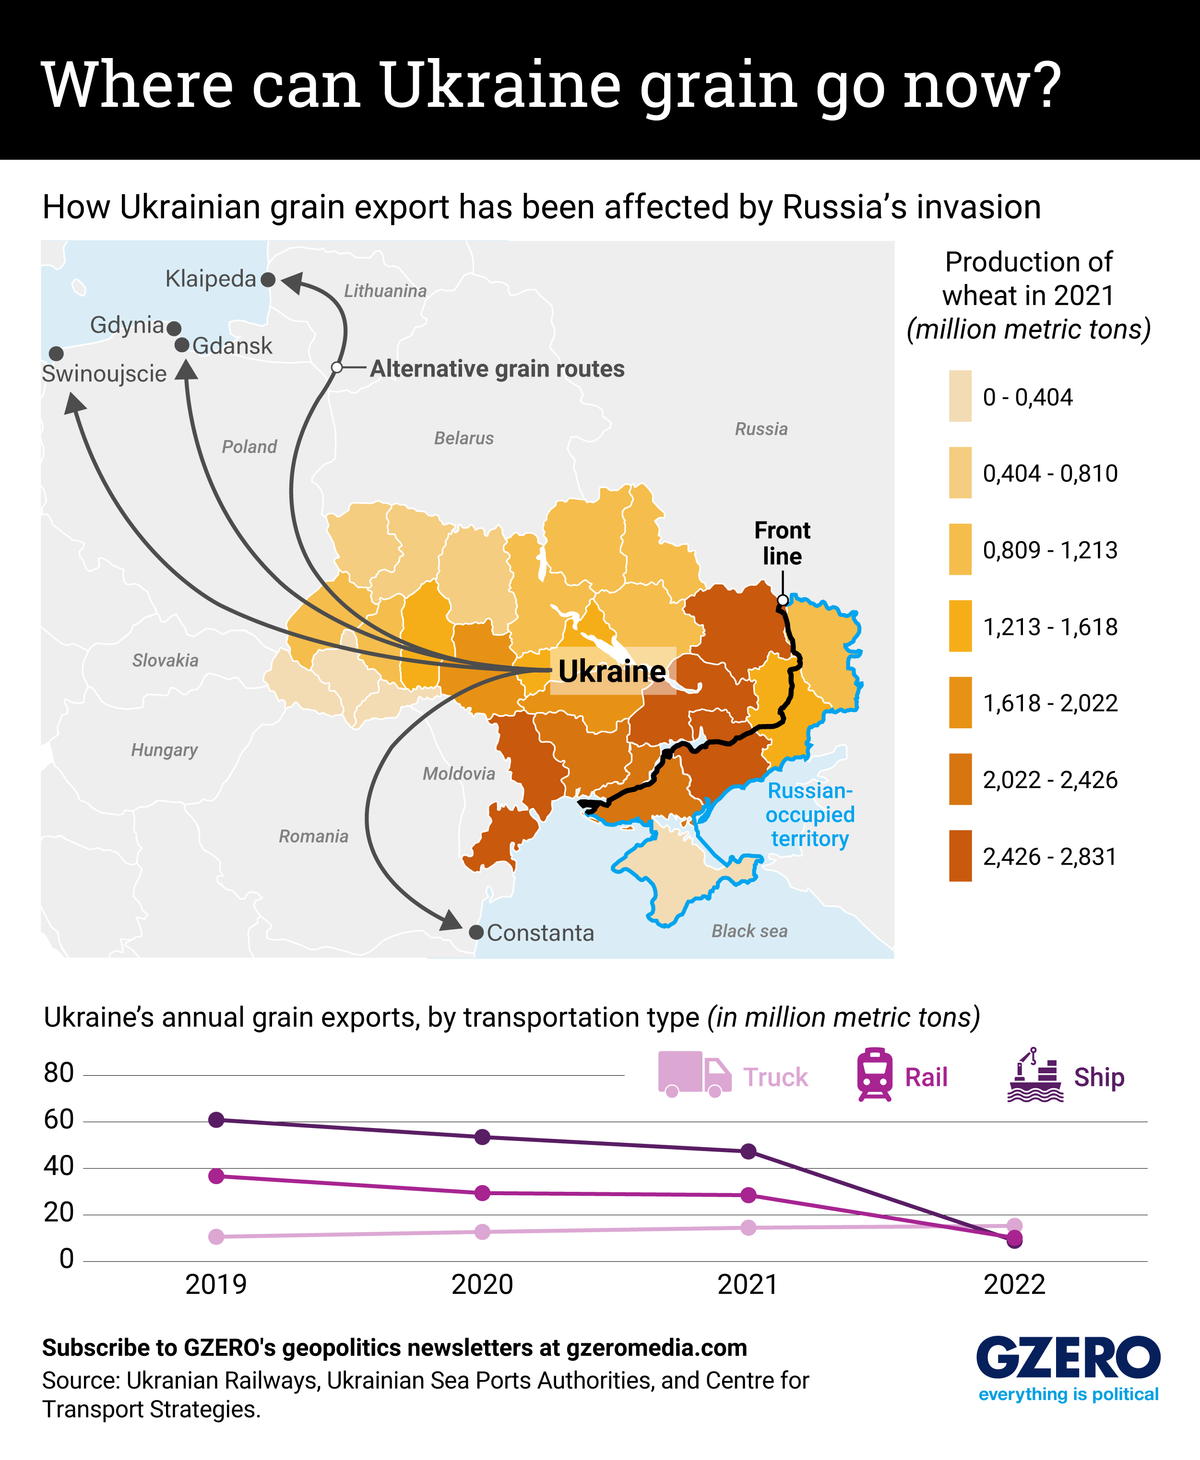 The Graphic Truth: Where can Ukraine grain go now?